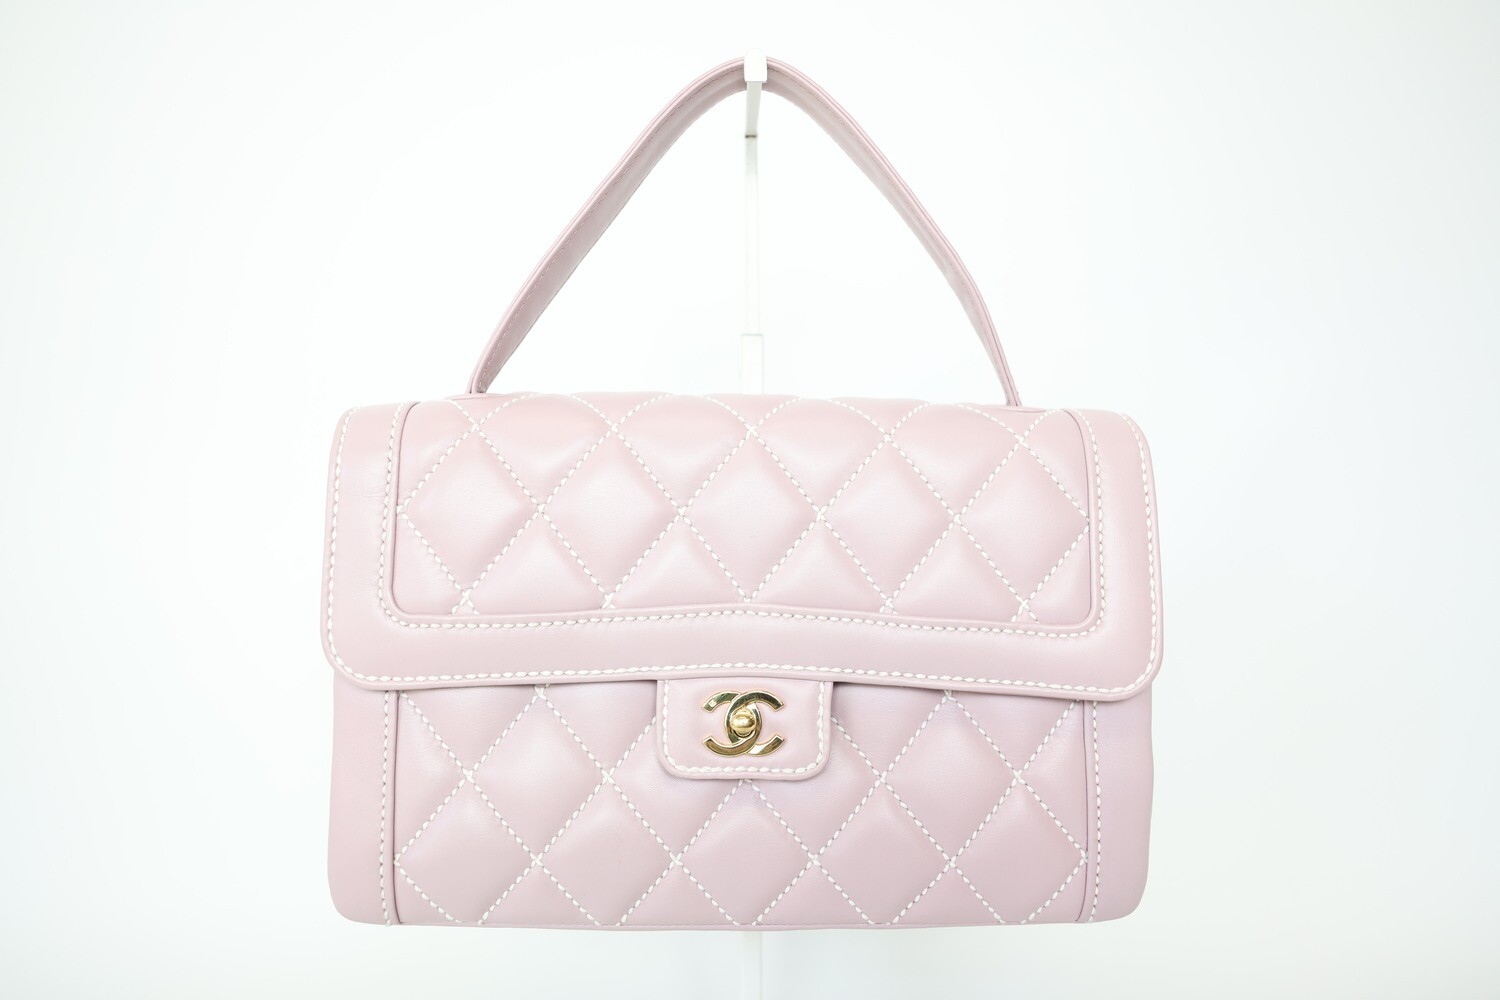 Chanel Top Handle Flap Bag, Wild Stitch Lilac Purple Lambskin Leather With Gold Hardware, Preowned In Dustbag WA001